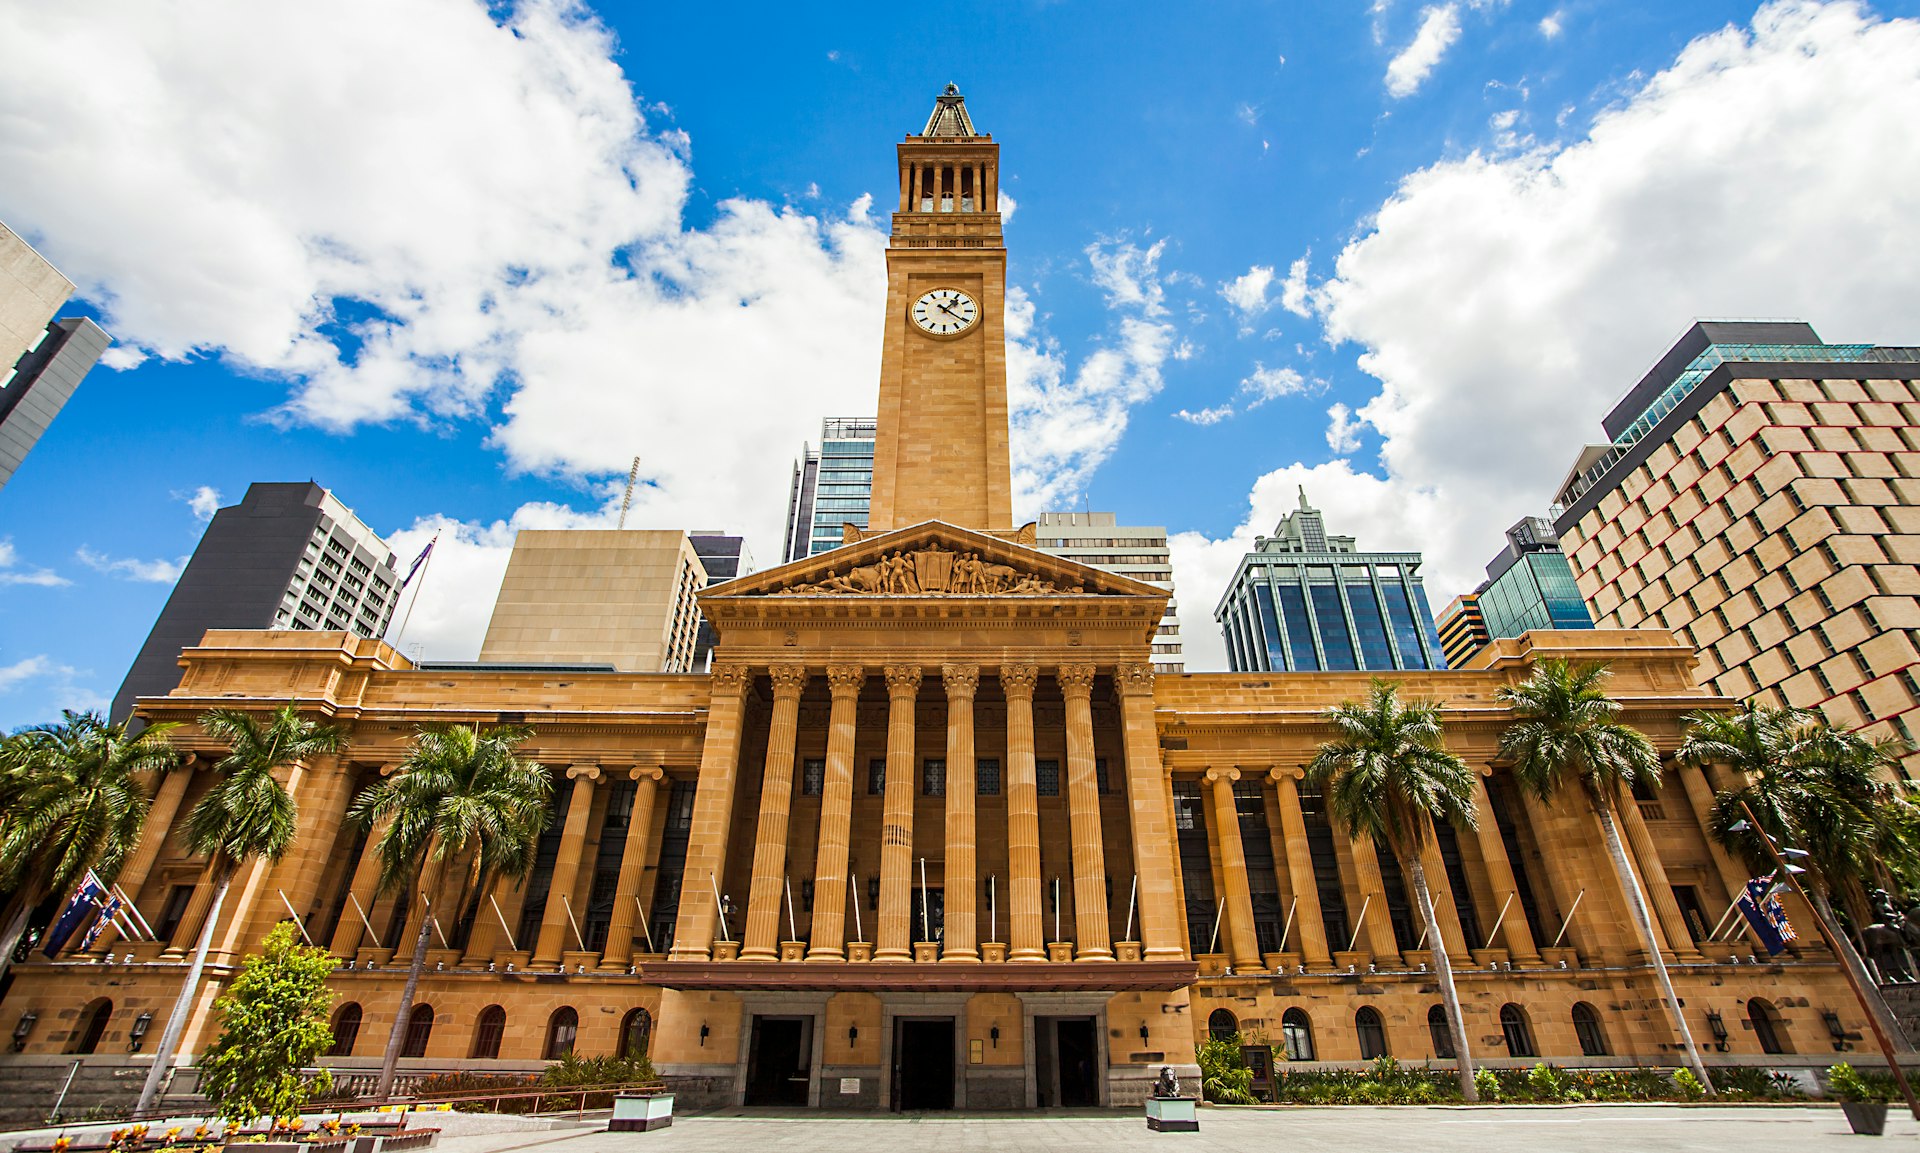 A view of the columned facade and tower of Brisbane City Hall from King George Square